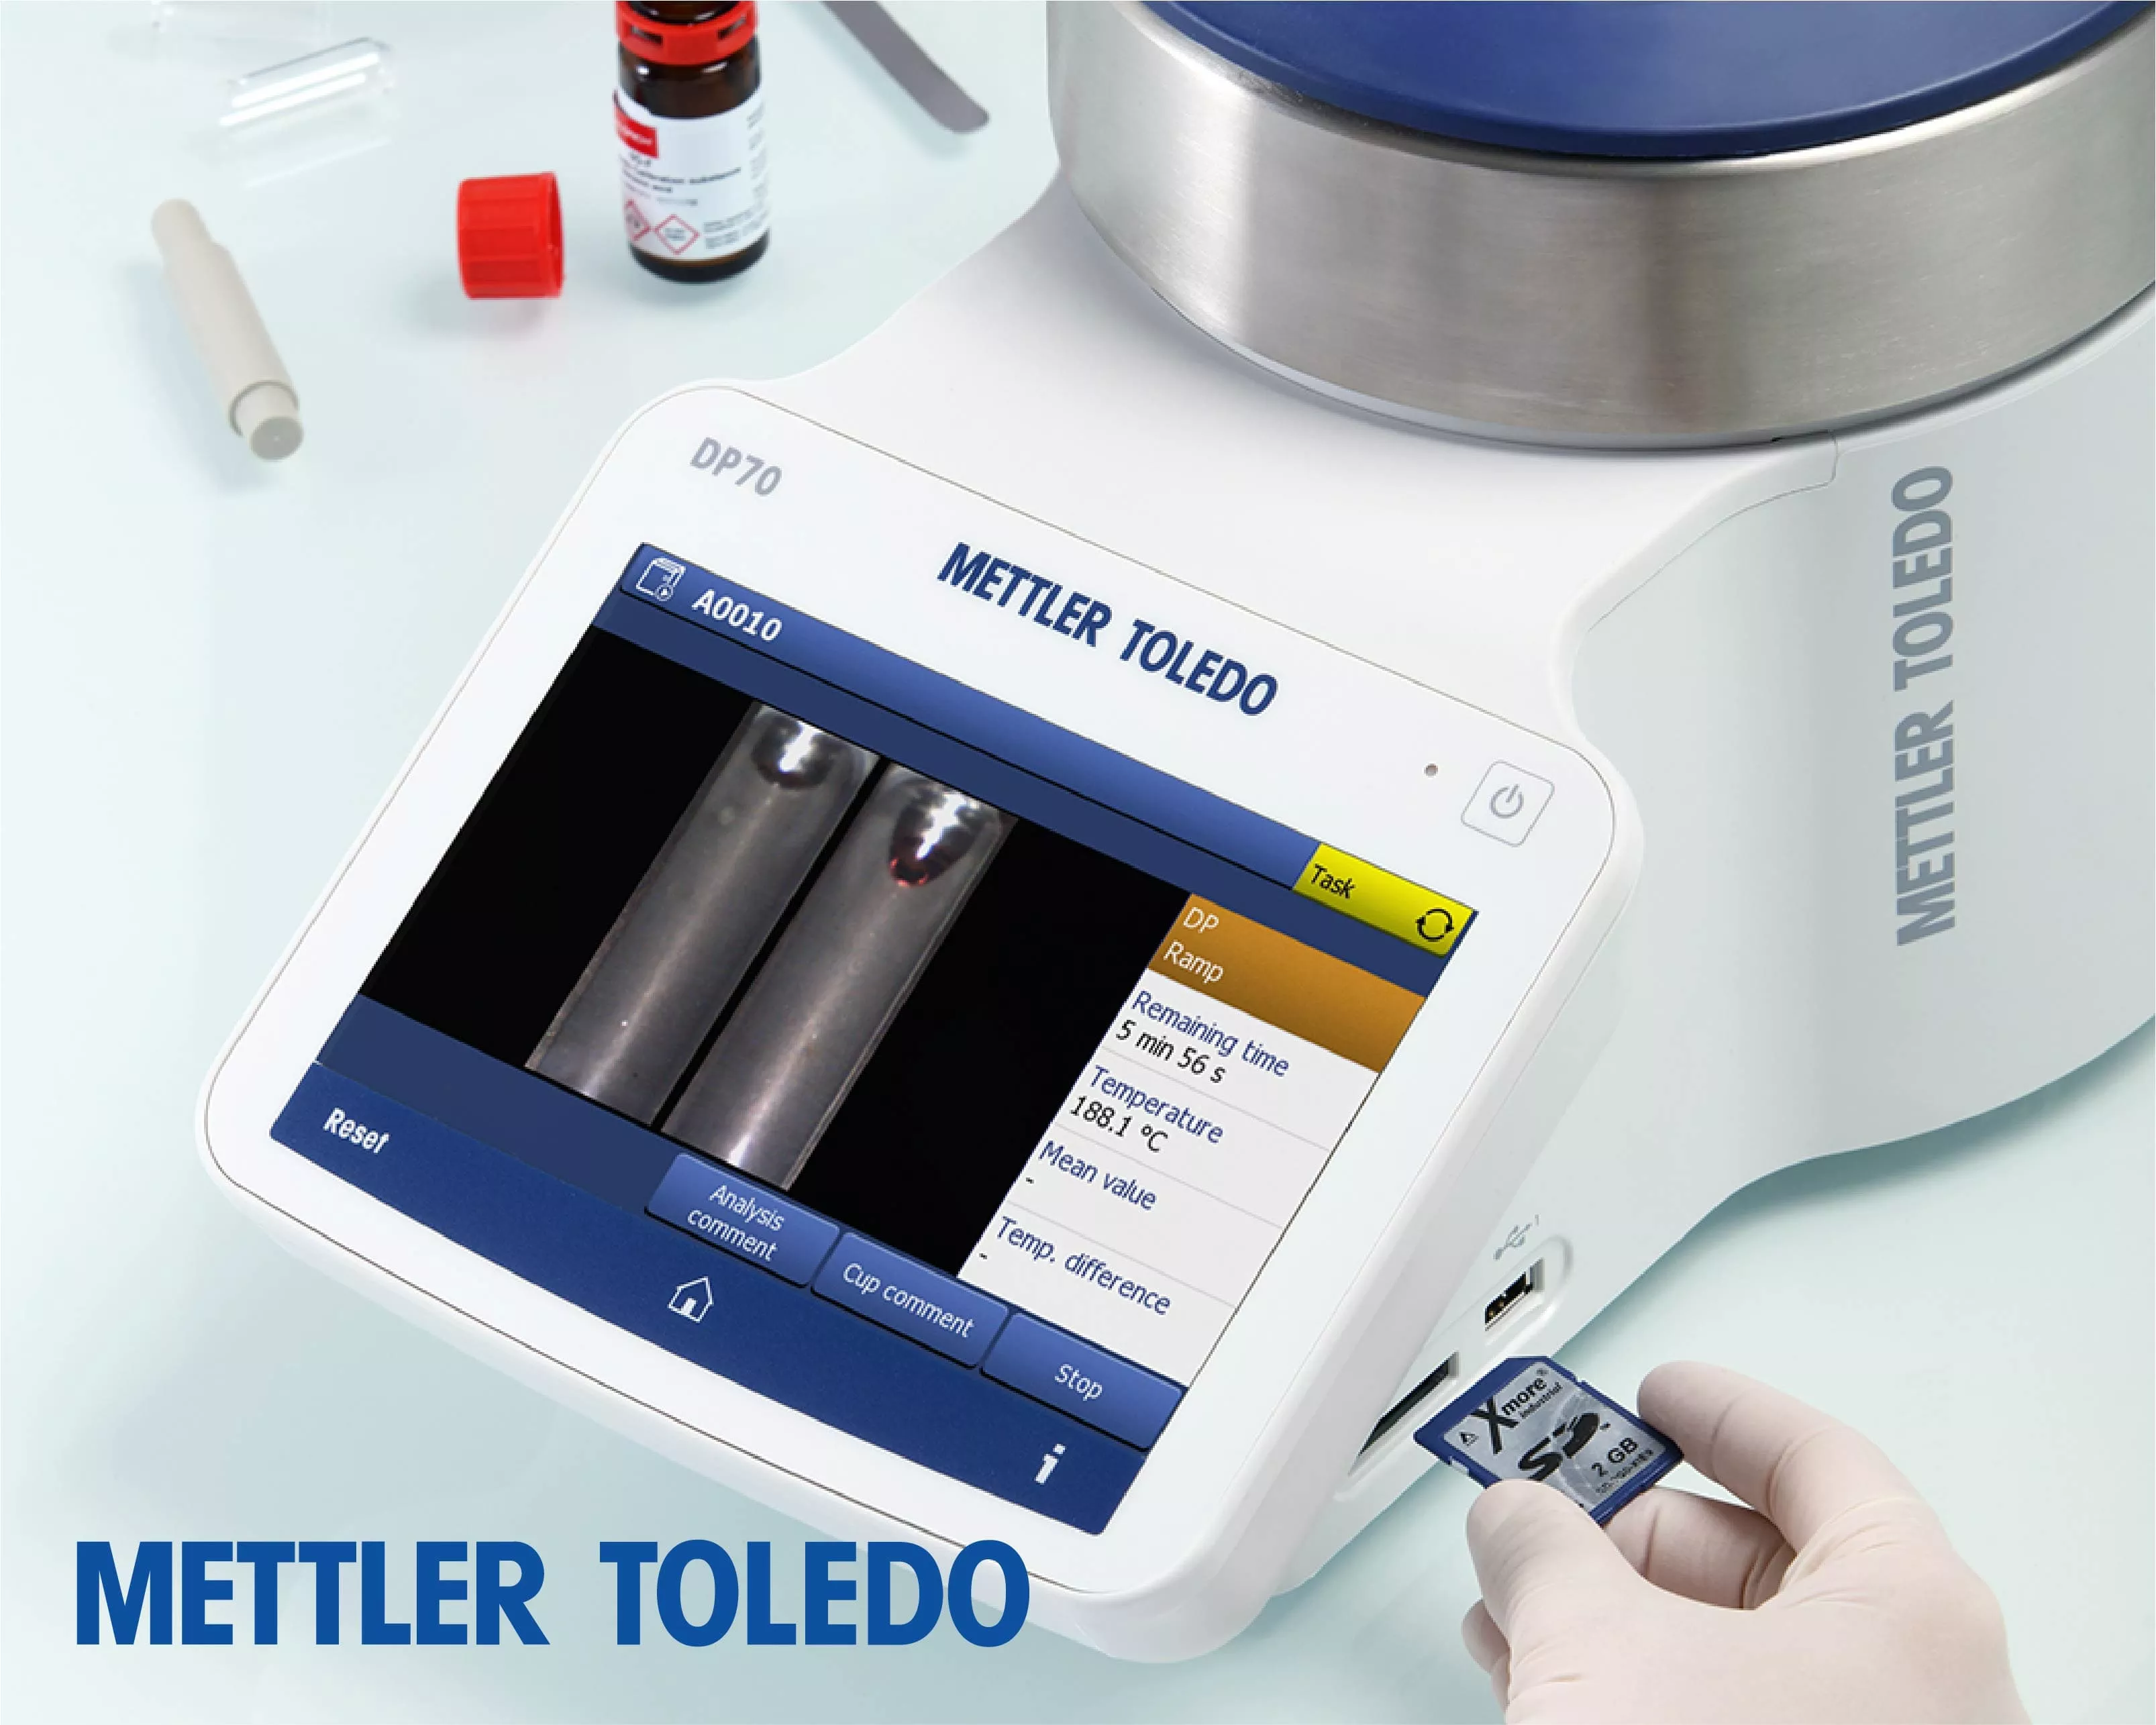 Mettler Toledo Melting Point and Dropping Point